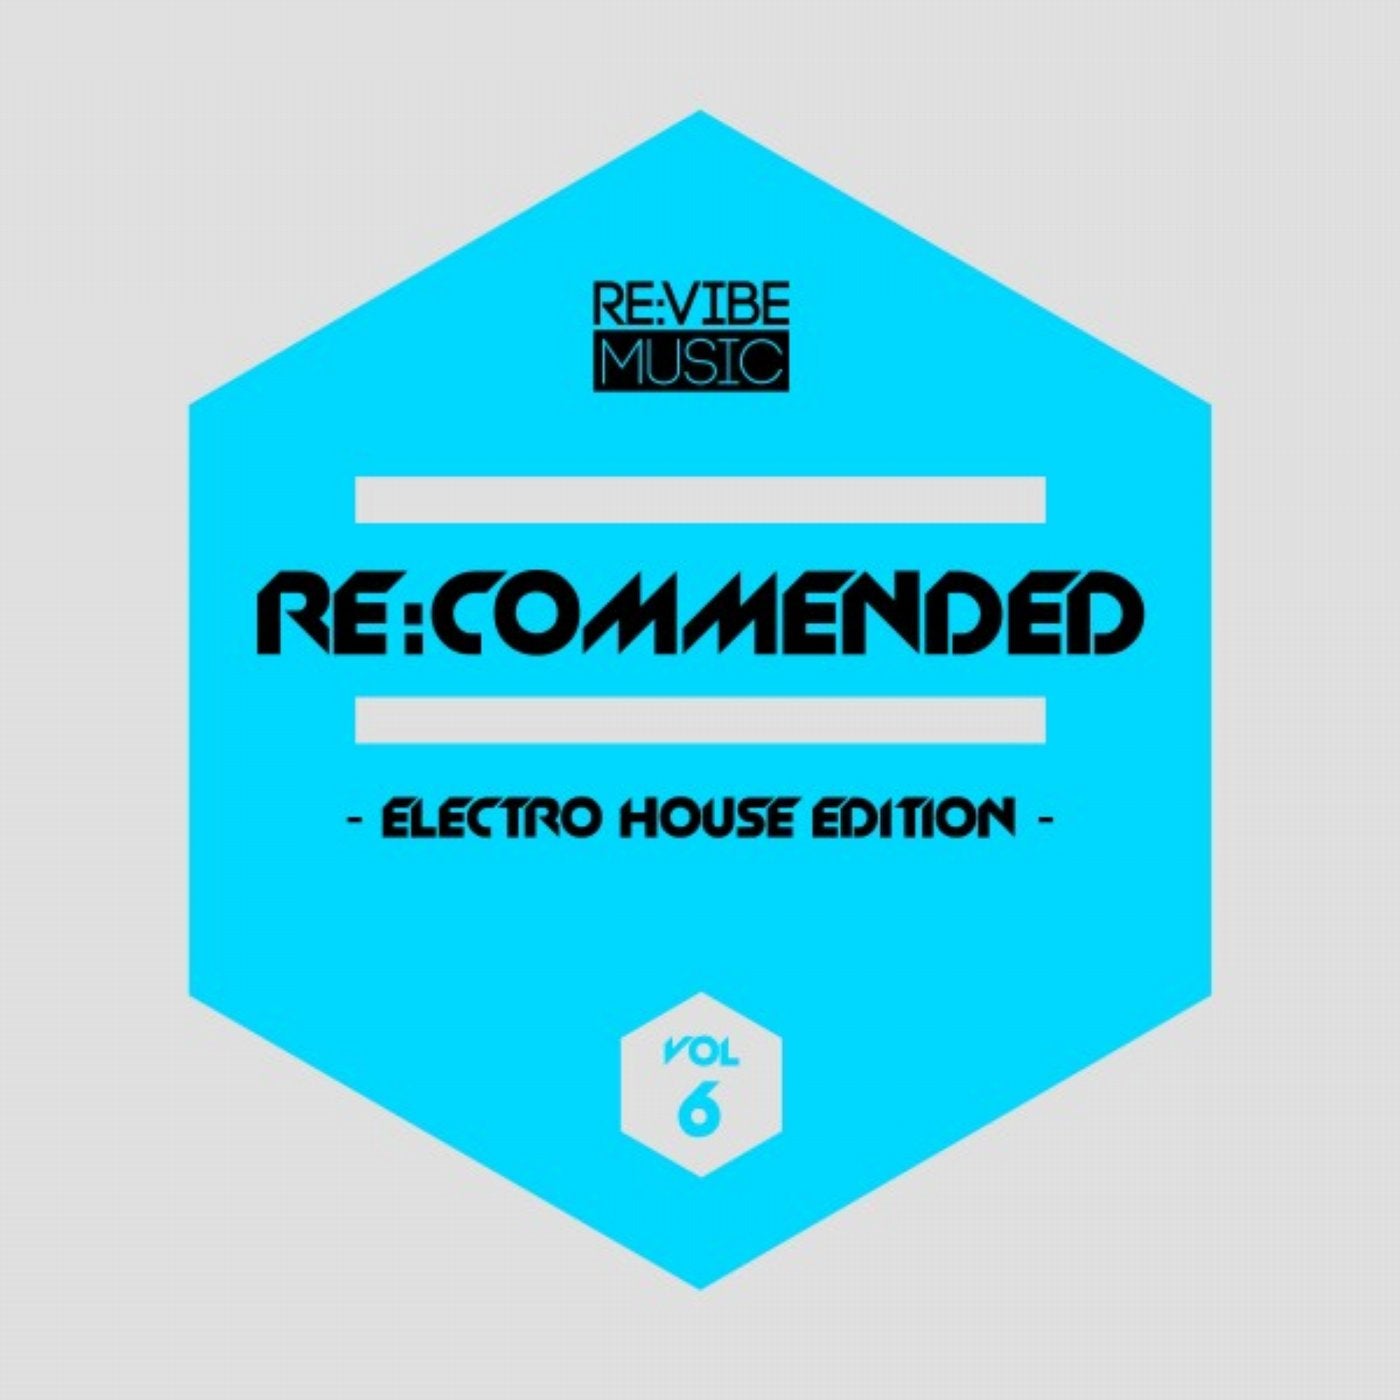 Re:Commended - Electro House Edition, Vol. 6